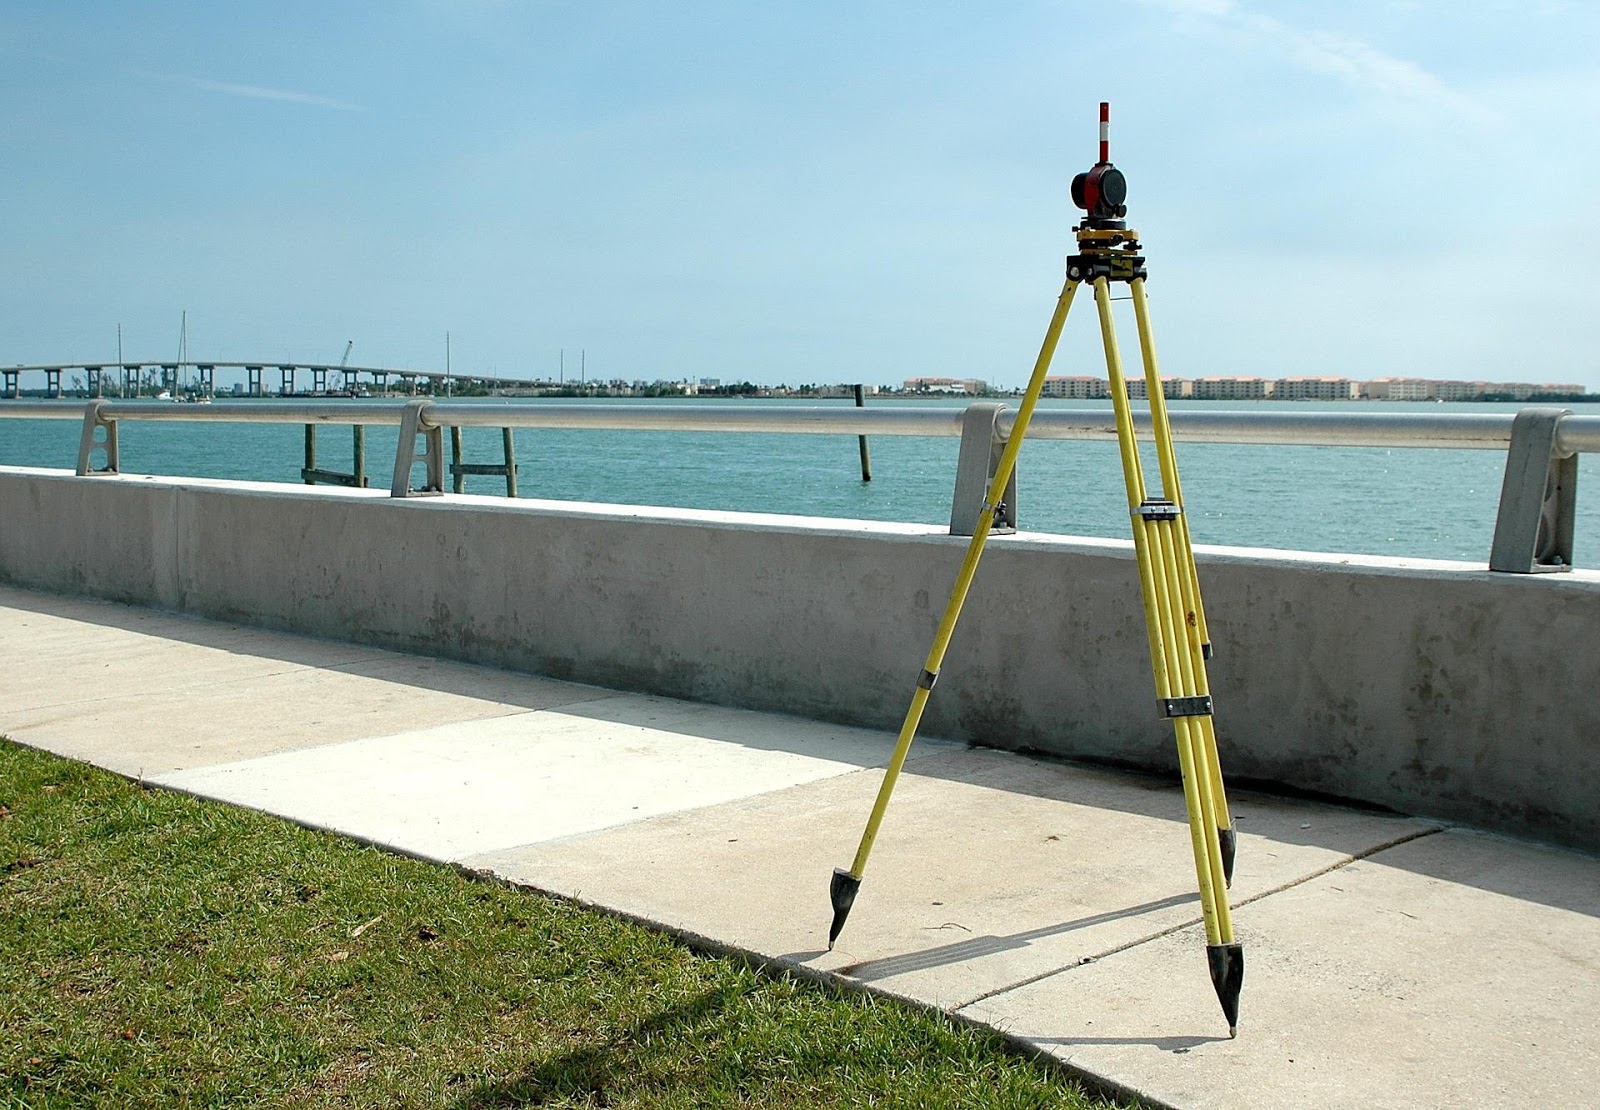 Equipment used for land surveying